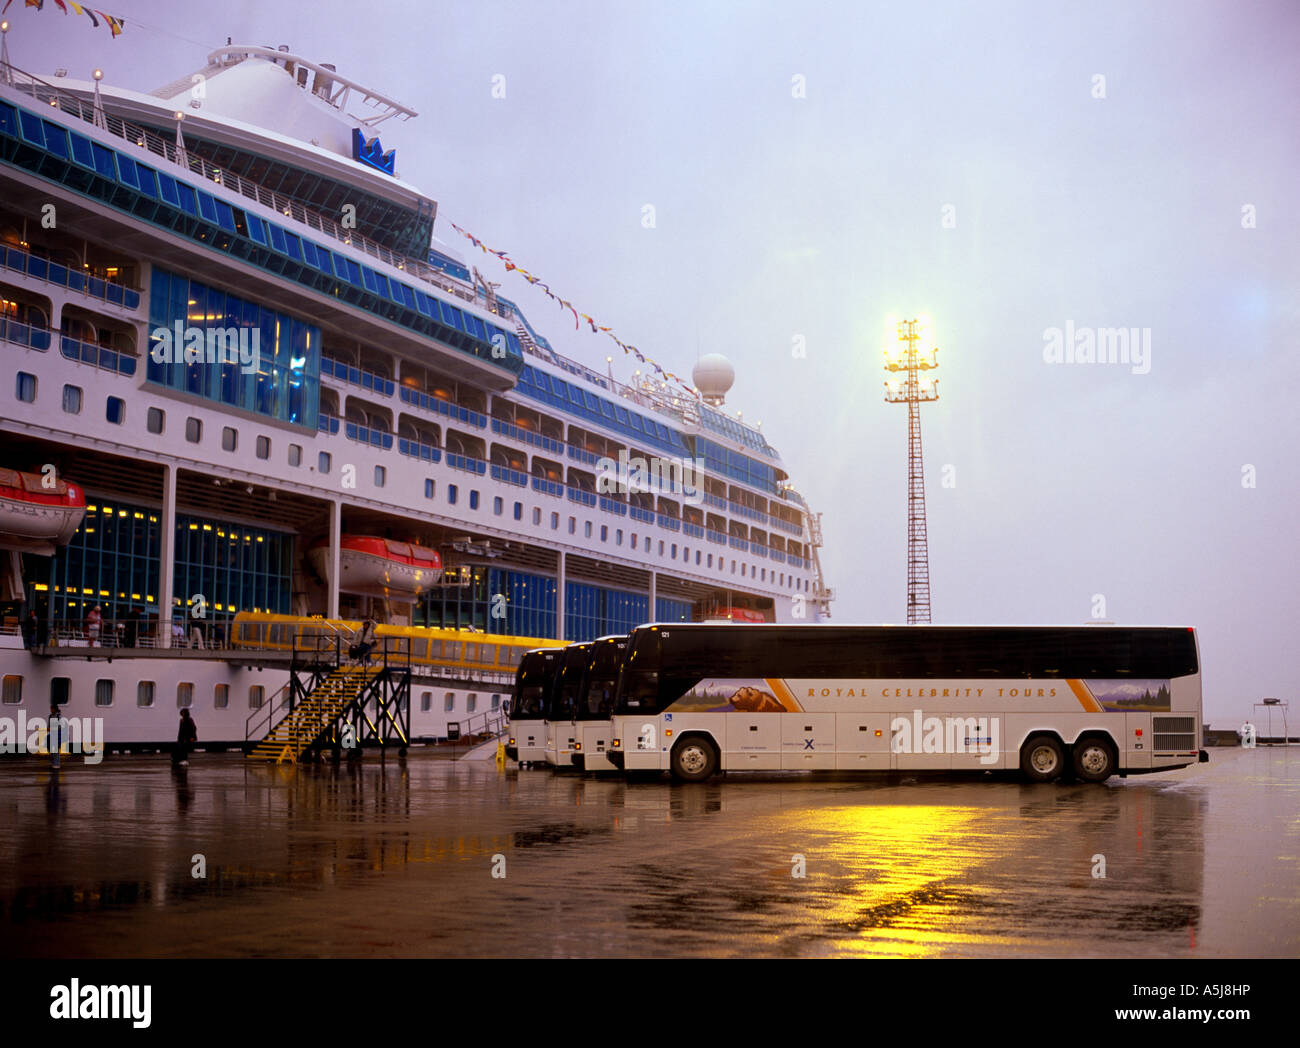 Royal Celebrity Tours motorcoaches lined up on the dock in Seward Stock Photo